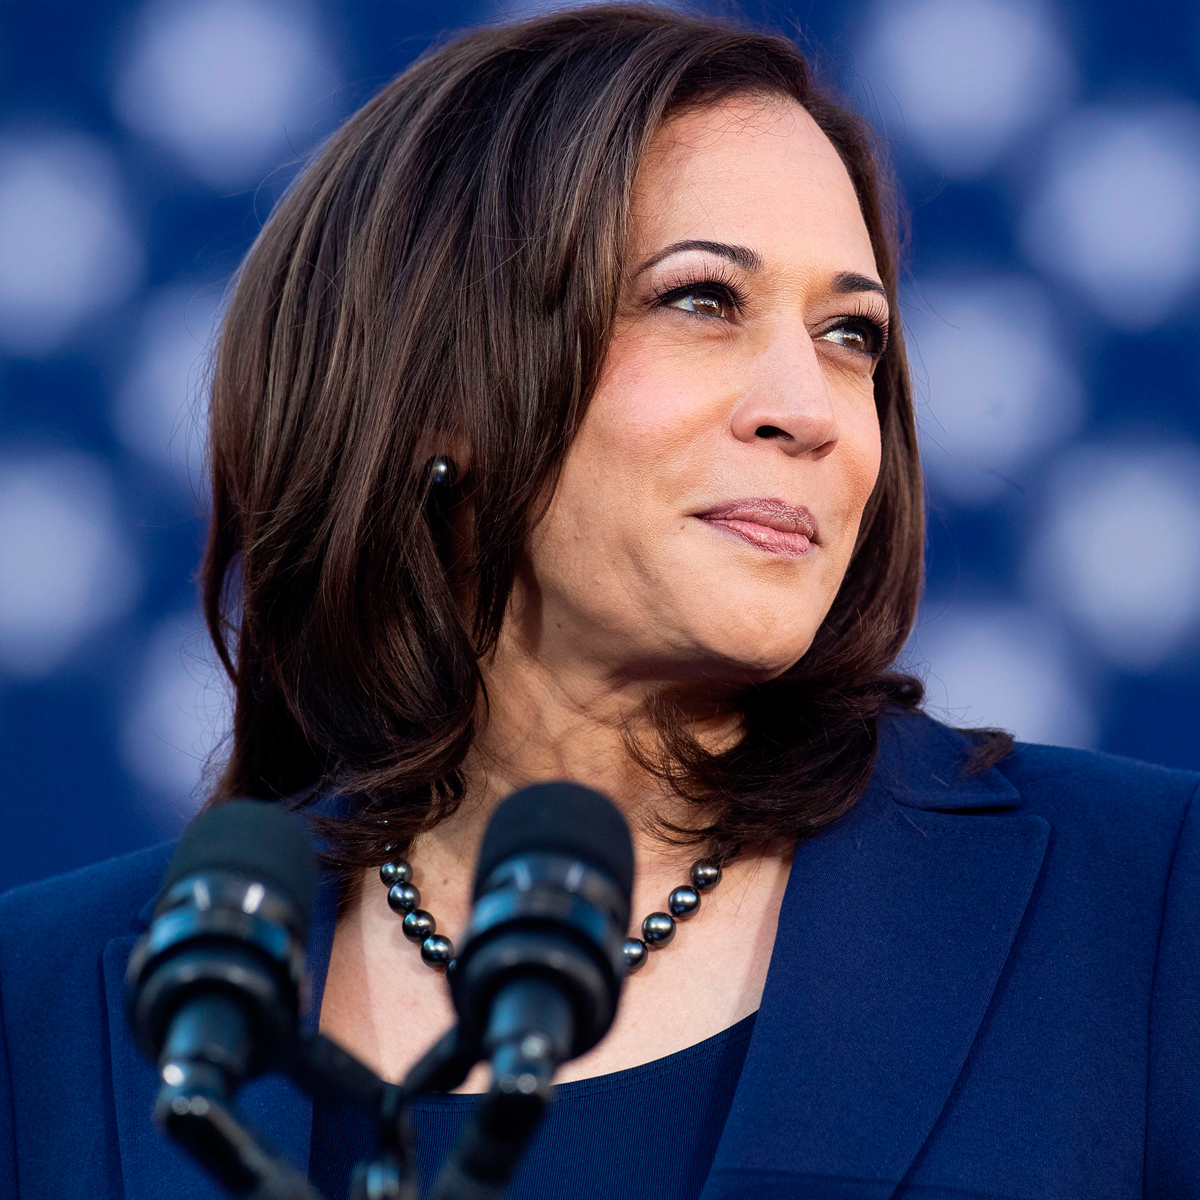 Vogue S Washed Out Kamala Harris Cover Draws Controversy E Online